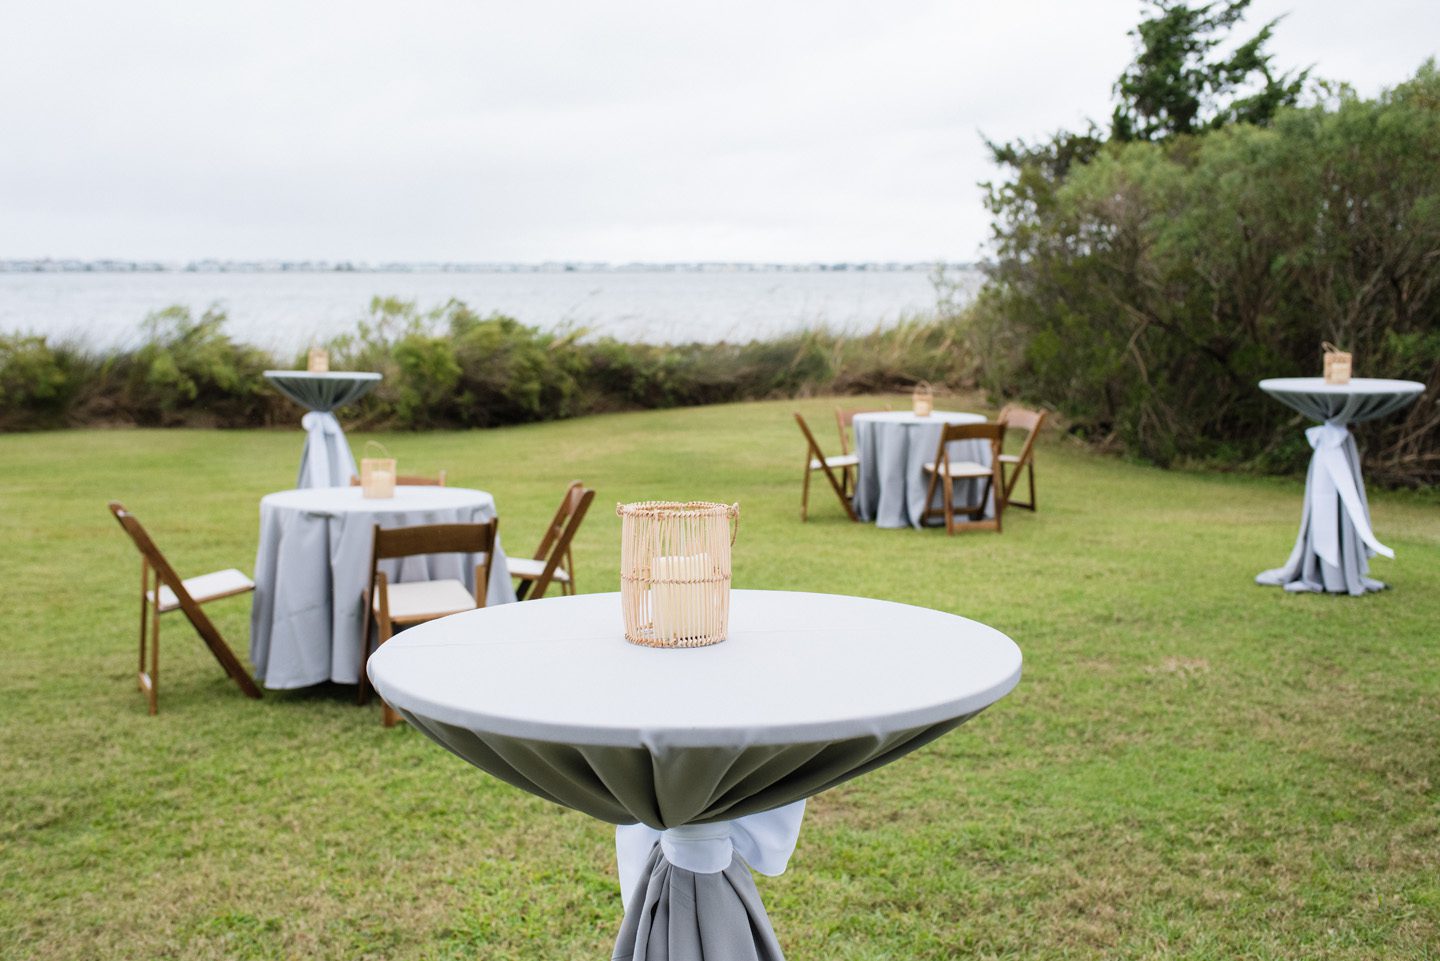 Wedding cocktail hour at Festival Park in Manteo